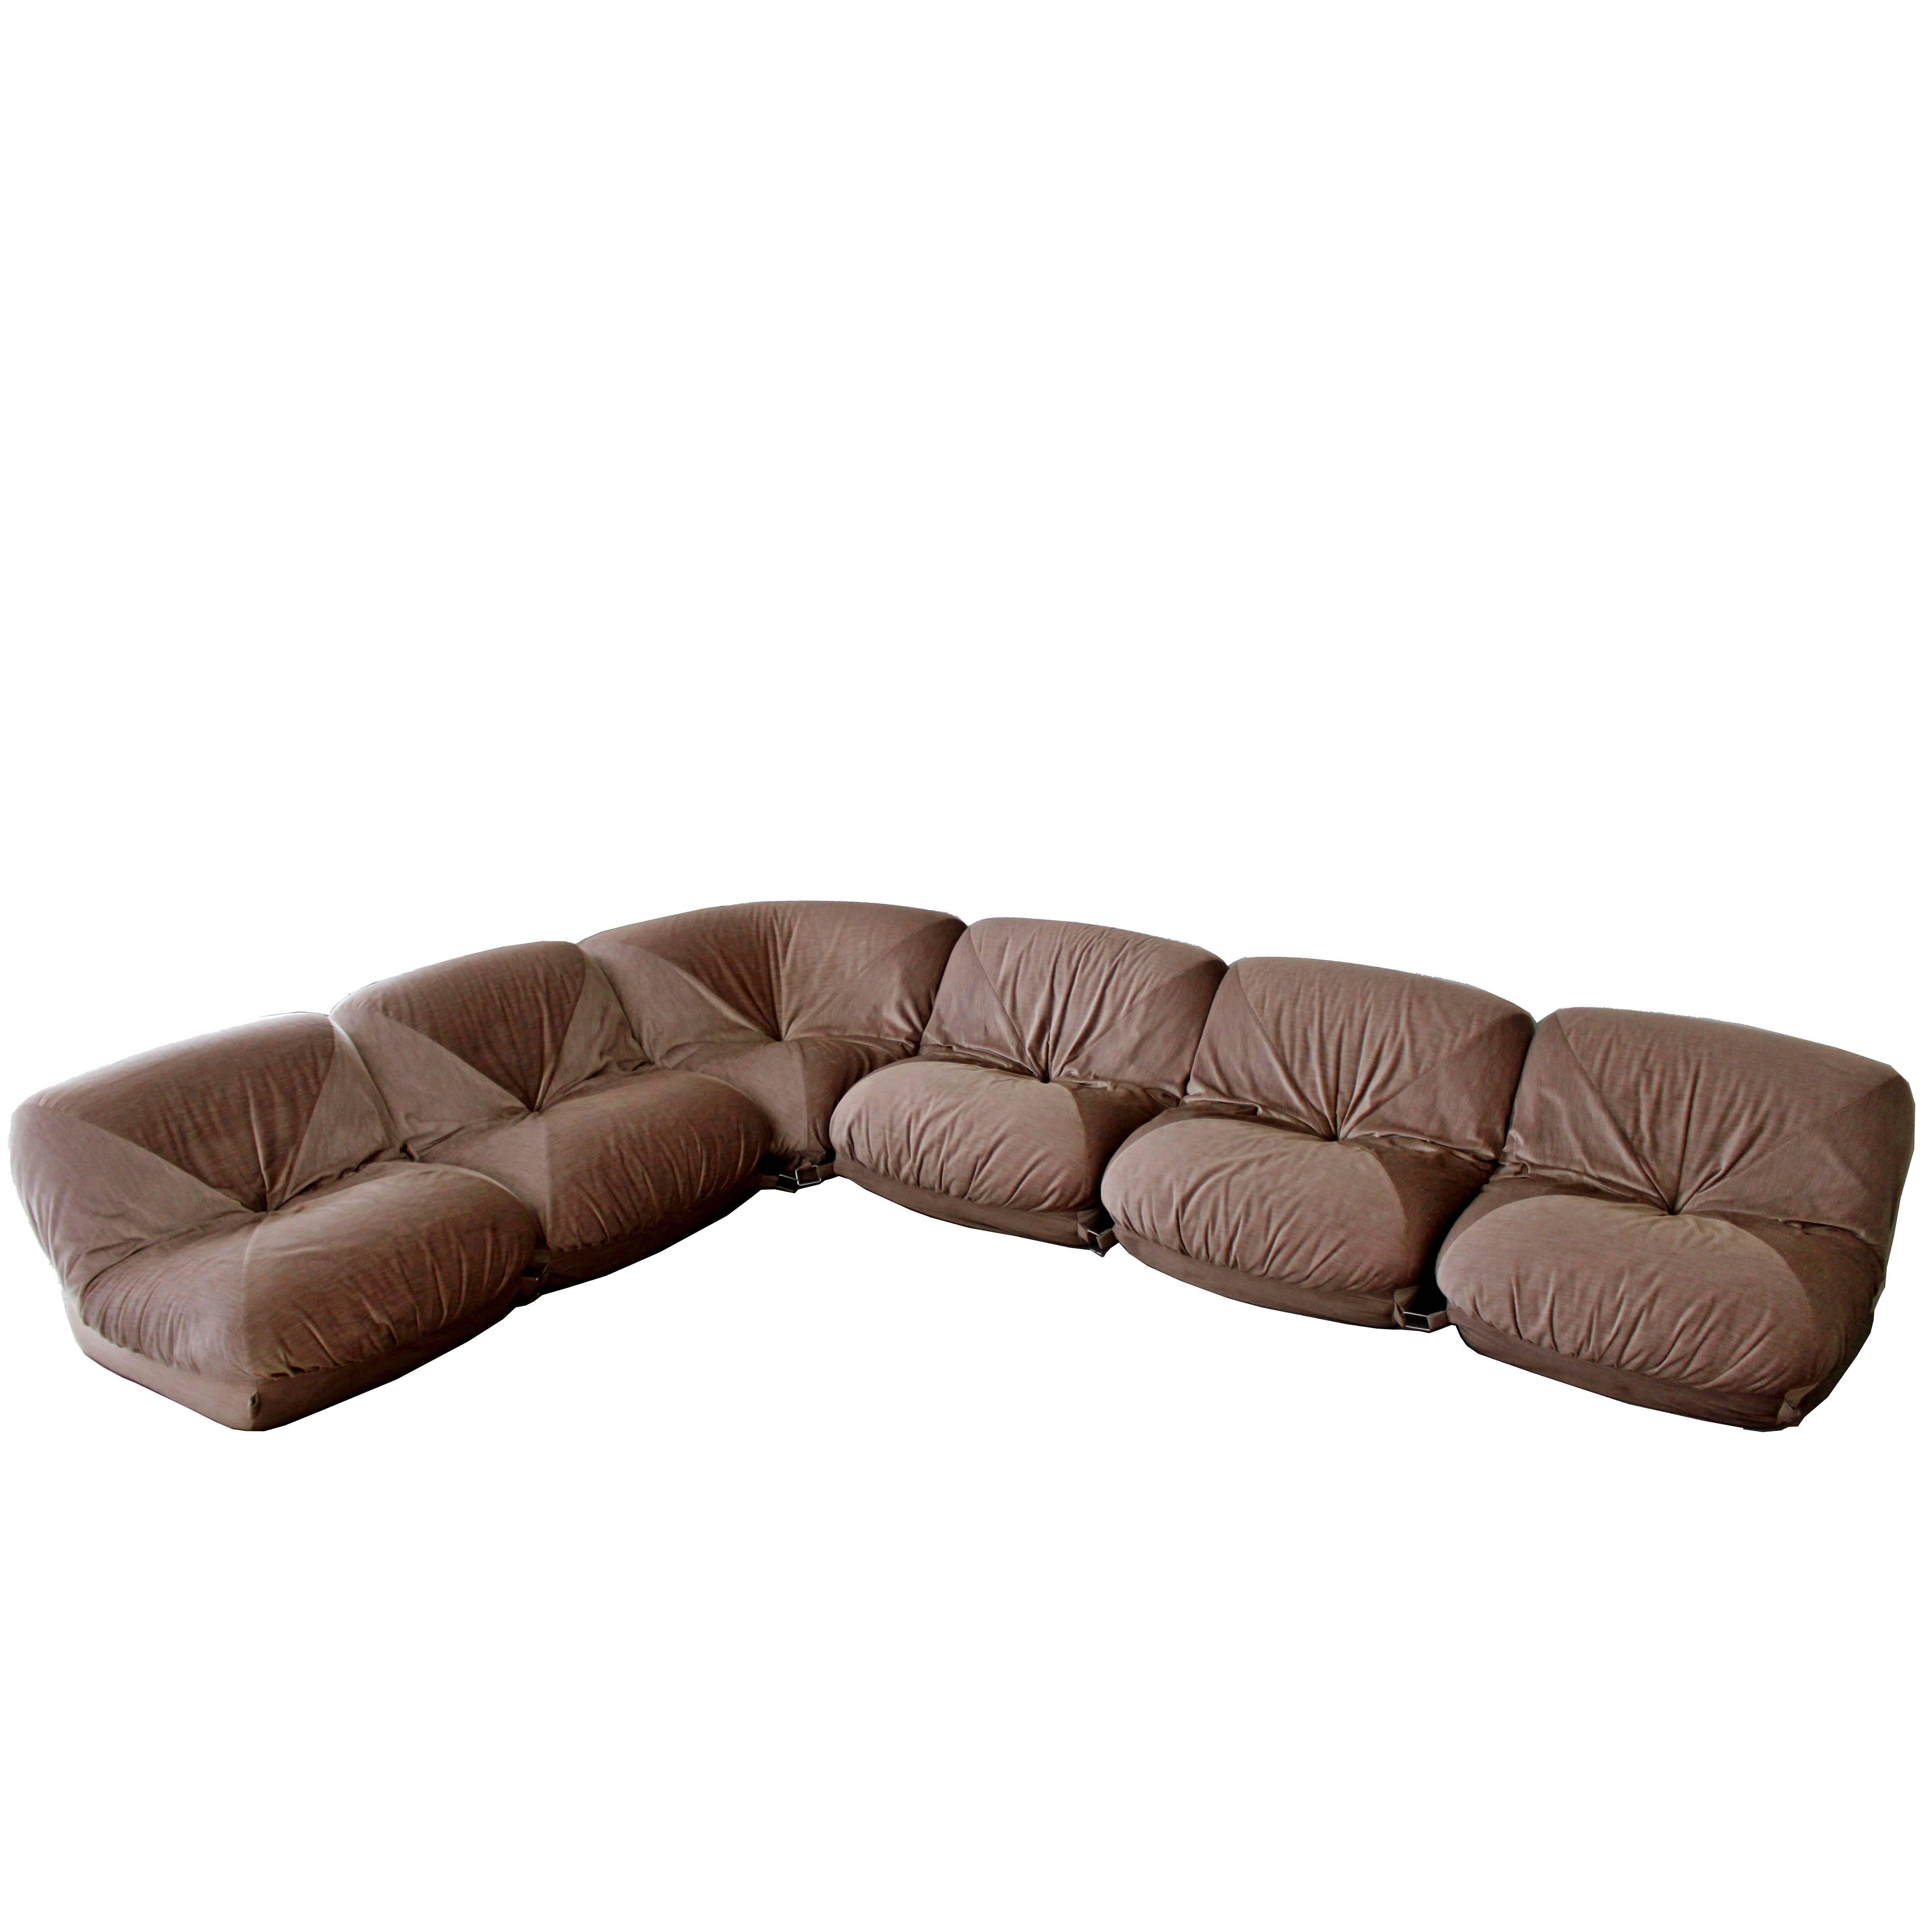 Mid-Century Modern Airborne Patate Six-Piece Sectional Sofa 1970s Velvet French 2